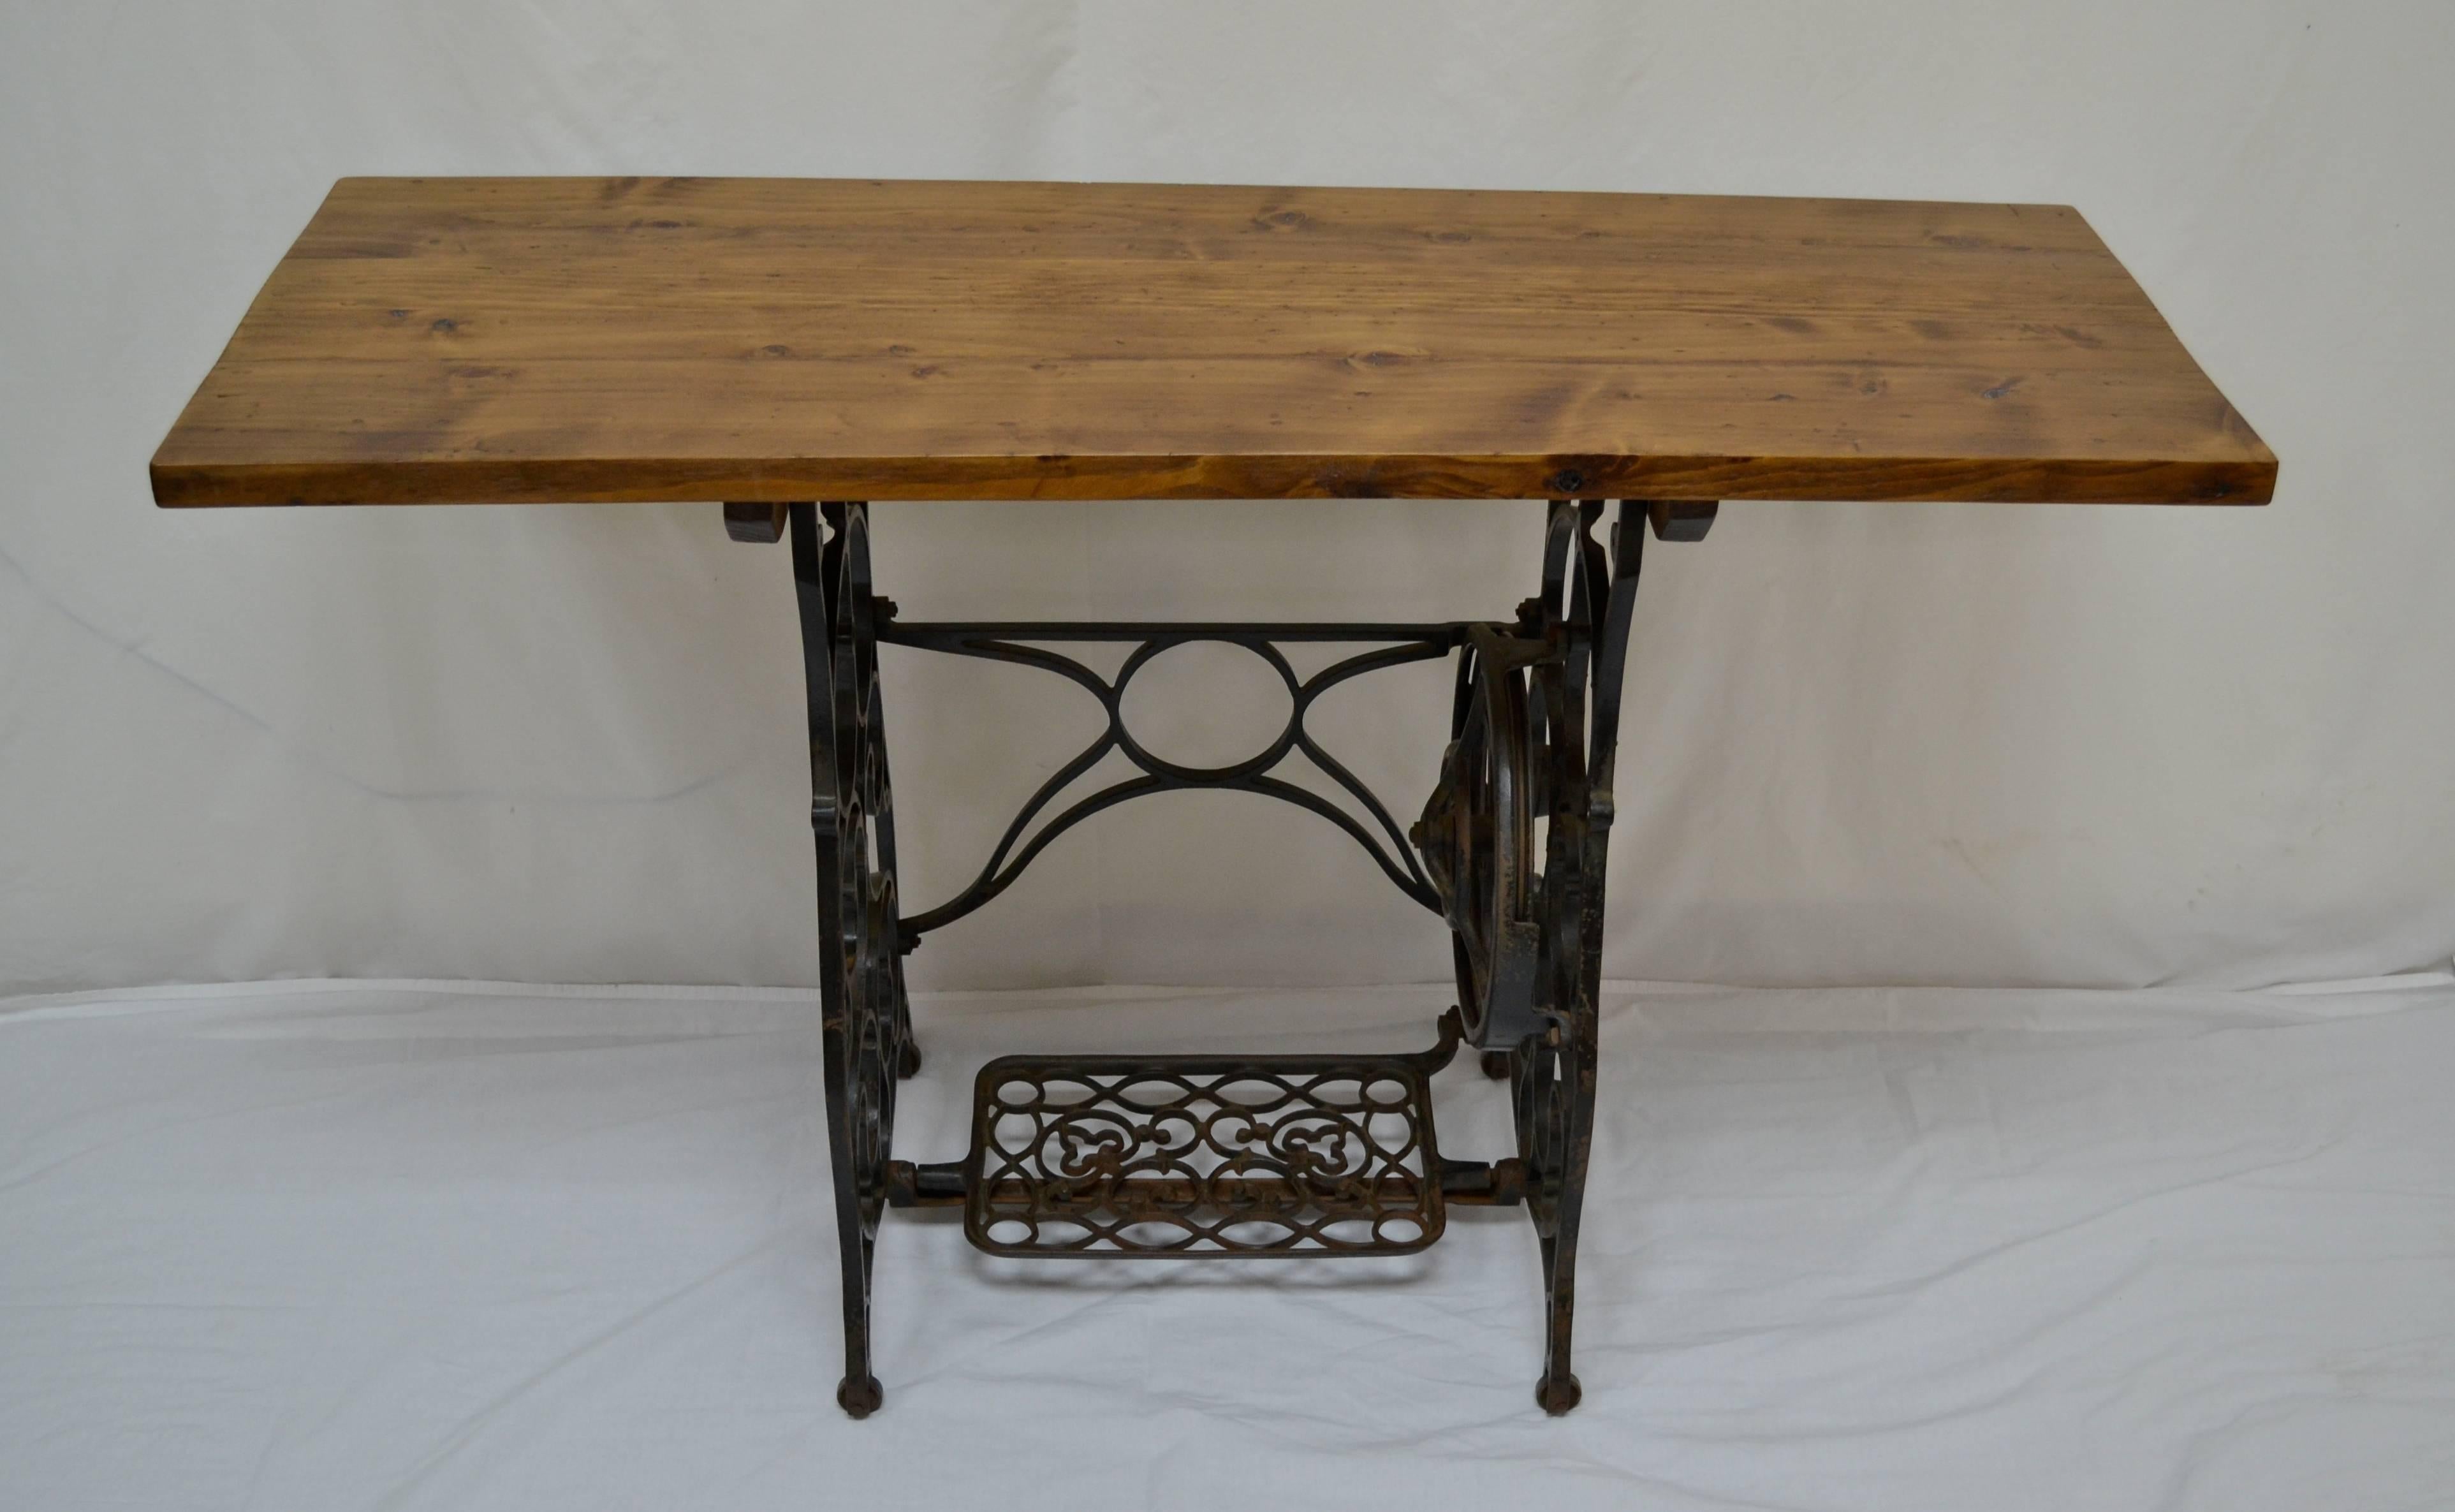 A sears “Franklin” sewing machine from circa 1910 once sat upon this handsome treadle base. We took some reclaimed pine of about the same age and married them to create this Industrial-style side table. Its shallow depth makes this piece perfect for